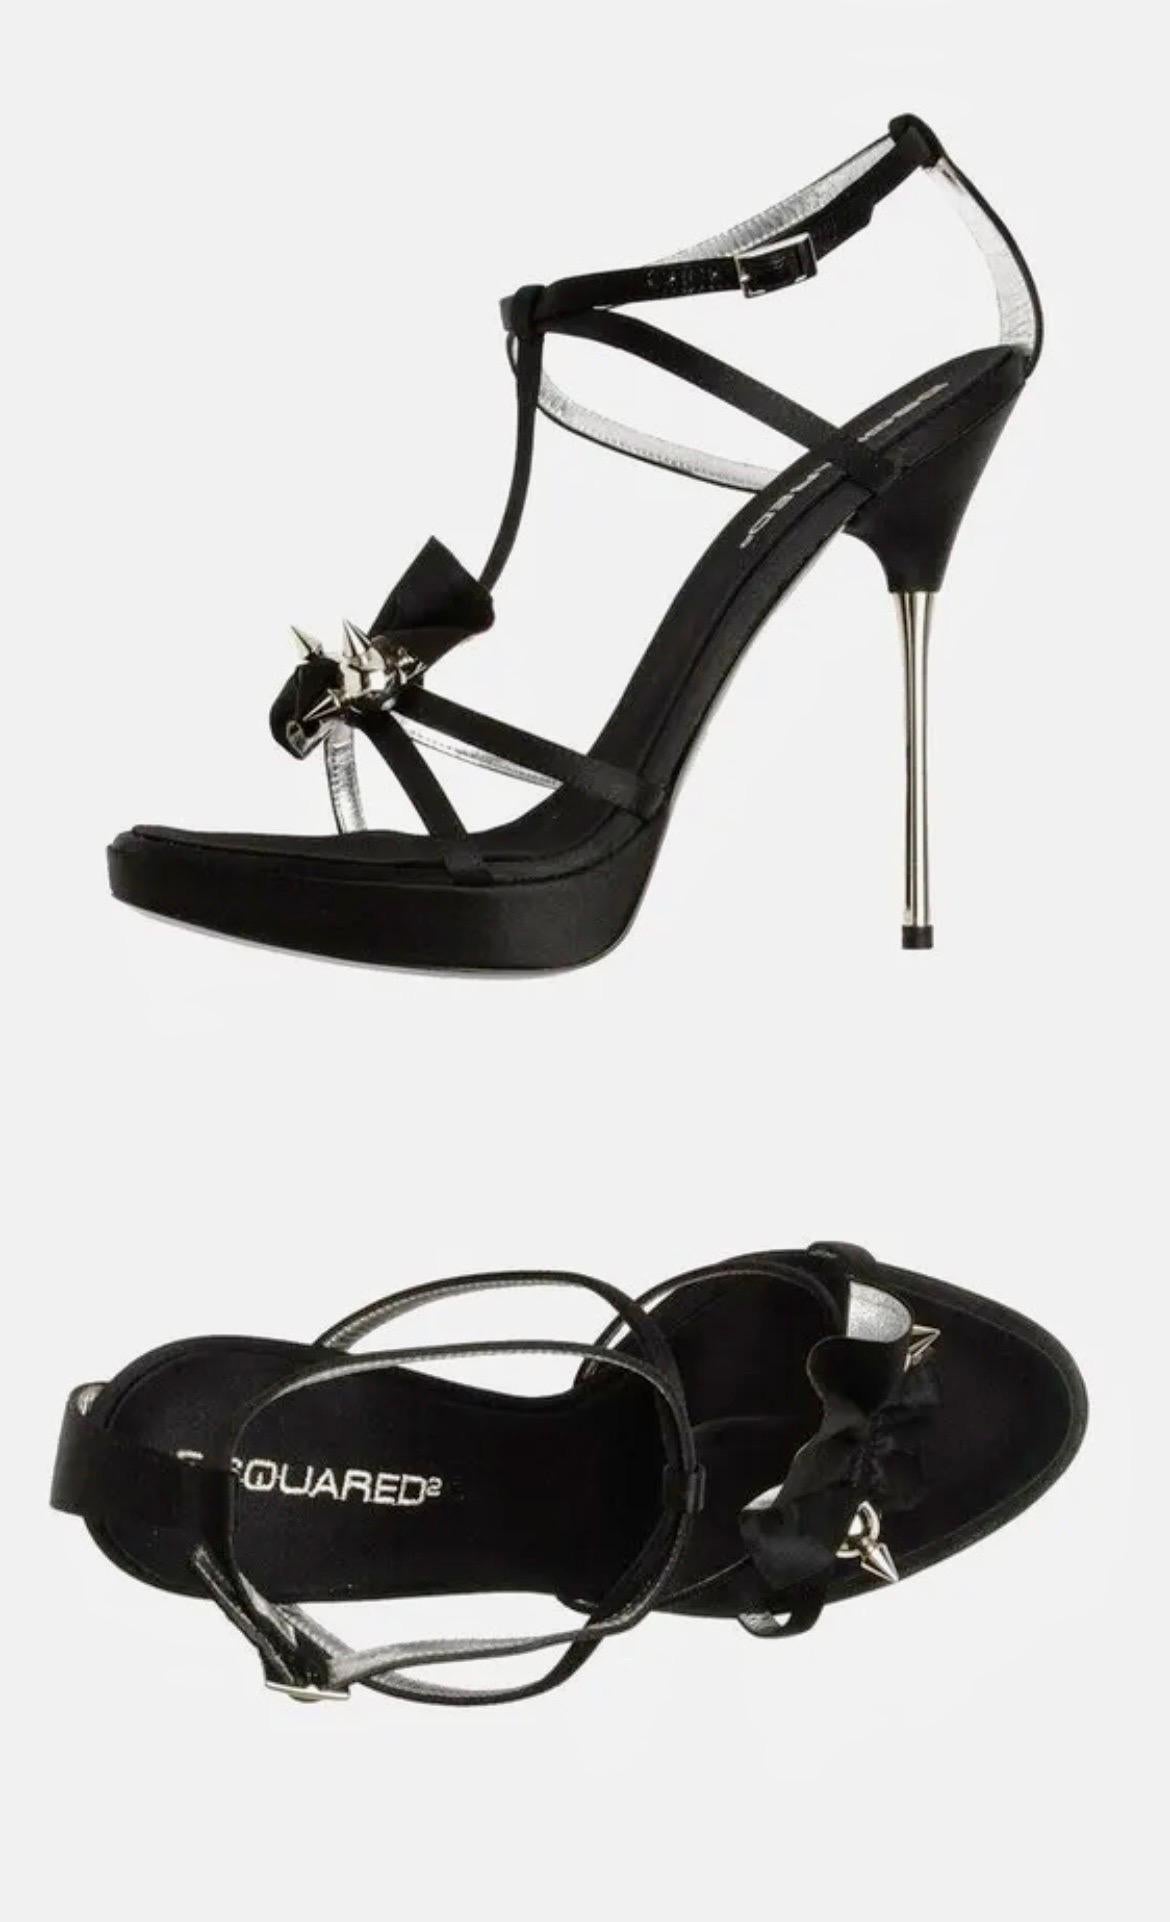 F/W 2008 Dsquared2 
Fetish Metal Stiletto Heel Platform Sandals 
Black satin, metal spikes, T-strap, silver leather lining, leather sole.
IT size 38 - US 8
Heel 5